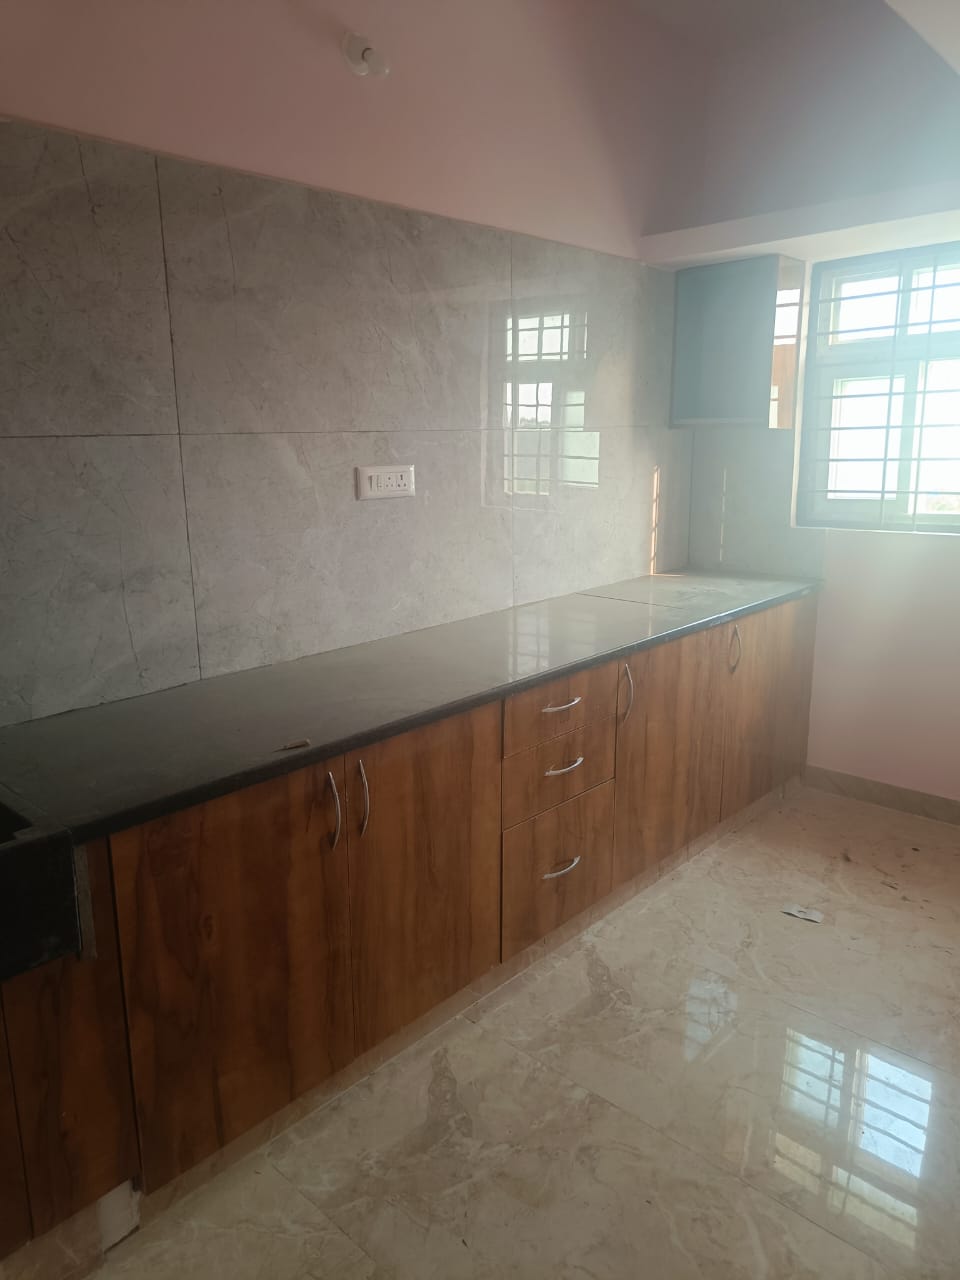 3 BHK Independent House for Lease Only at JAML2 - 2783 in Agrahara Dasarahalli